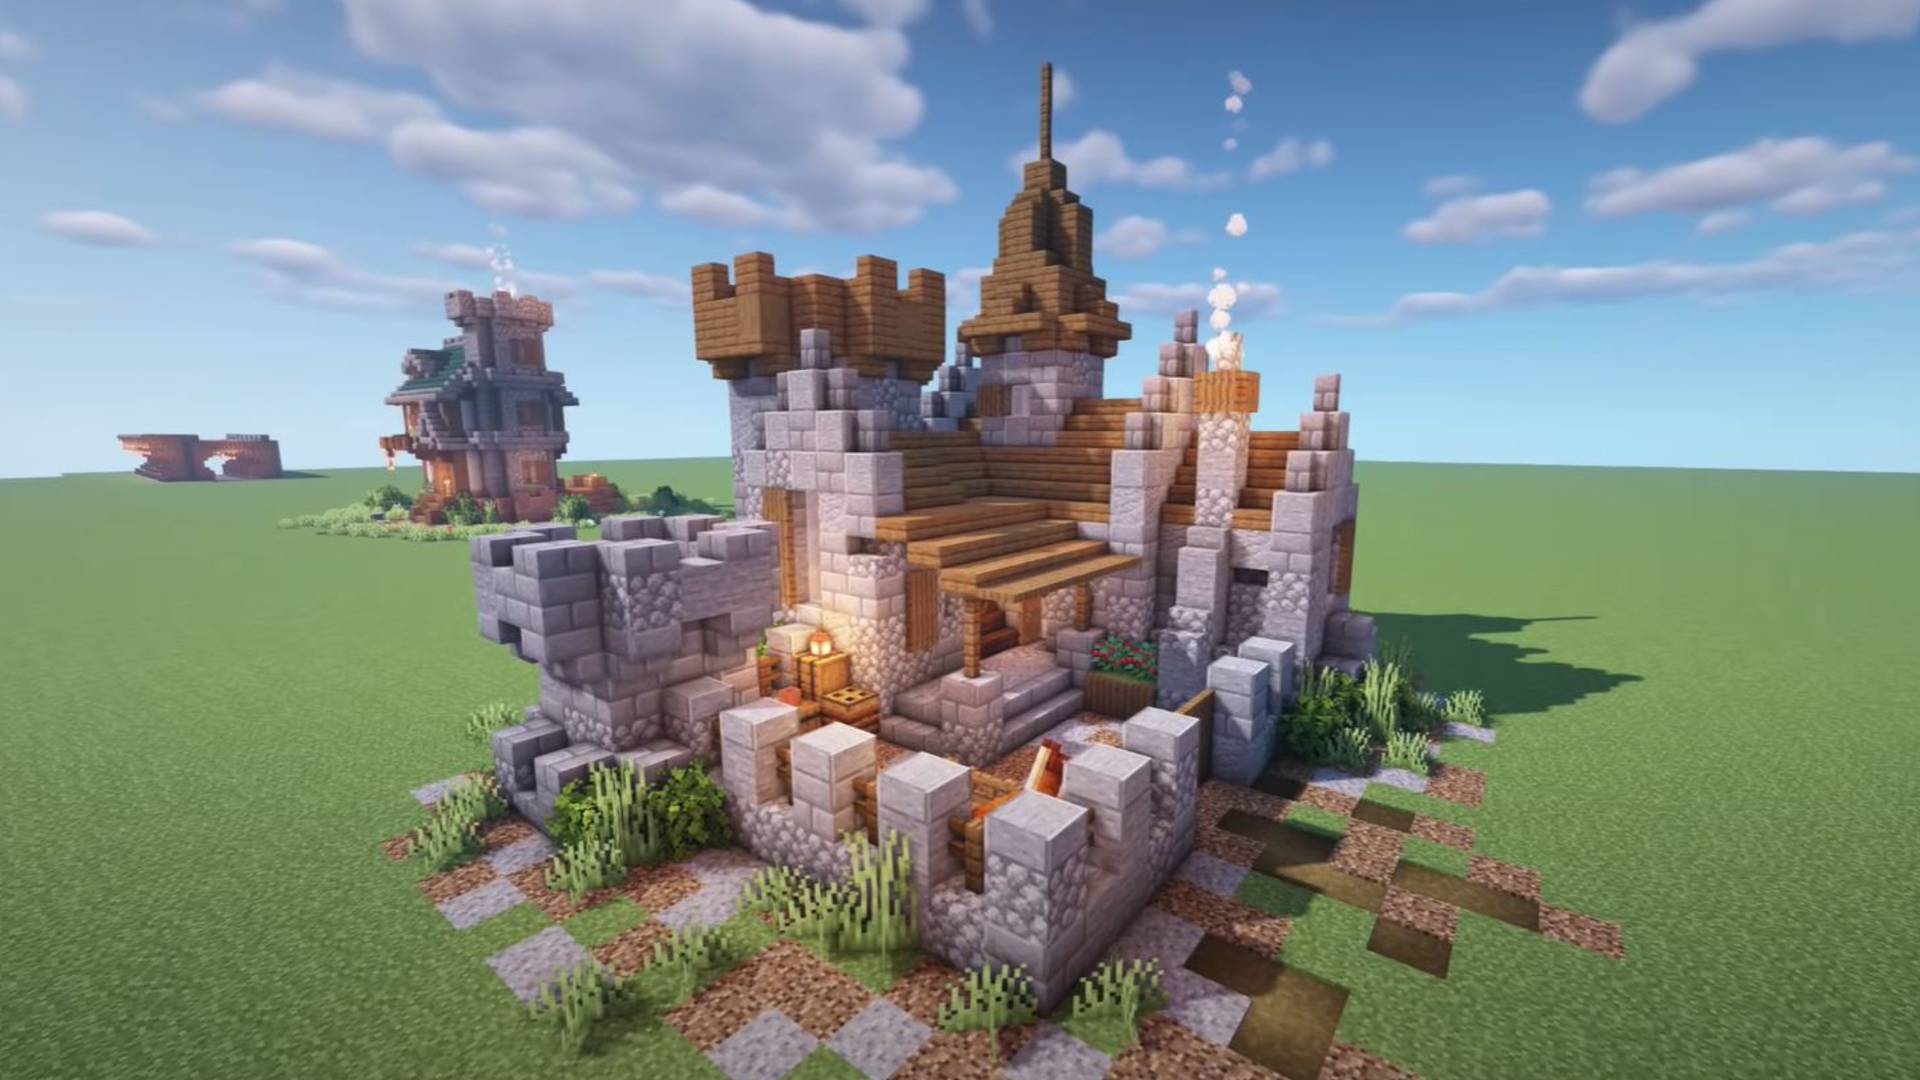 Minecraft castle ideas: how to build a castle in Minecraft using